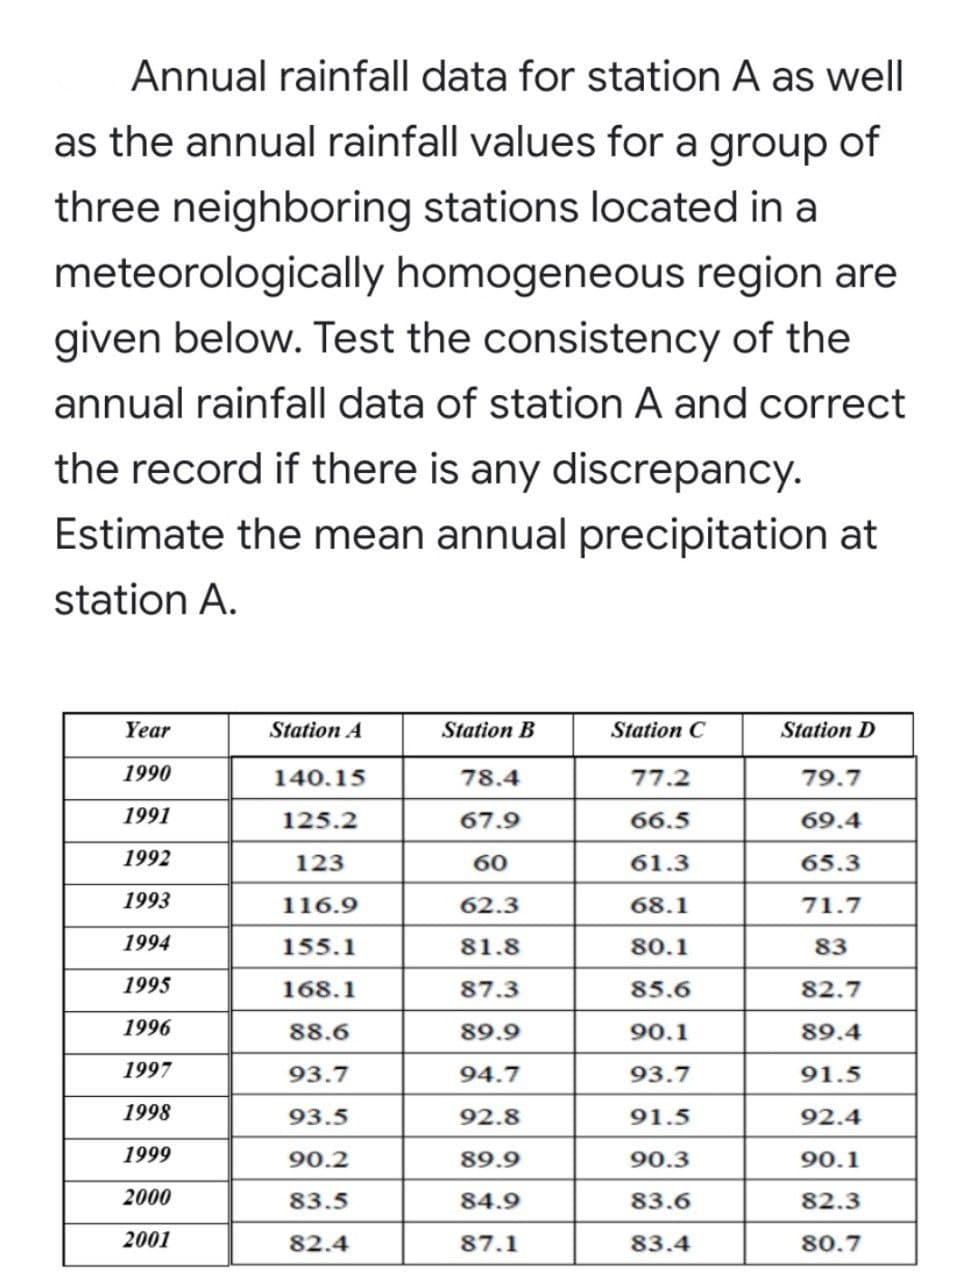 Annual rainfall data for station A as well
as the annual rainfall values for a group of
three neighboring stations located in a
meteorologically homogeneous region are
given below. Test the consistency of the
annual rainfall data of station A and correct
the record if there is any discrepancy.
Estimate the mean annual precipitation at
station A.
Year
Station A
Station B
Station C
Station D
1990
140.15
78.4
77.2
79.7
1991
125.2
67.9
66.5
69.4
1992
123
60
61.3
65.3
1993
116.9
62.3
68.1
71.7
1994
155.1
81.8
80.1
83
1995
168.1
87.3
85.6
82.7
1996
88.6
89.9
90.1
89.4
1997
93.7
94.7
93.7
91.5
1998
93.5
92.8
91.5
92.4
1999
90.2
89.9
90.3
90.1
2000
83.5
84.9
83.6
82.3
2001
82.4
87.1
83.4
80.7
